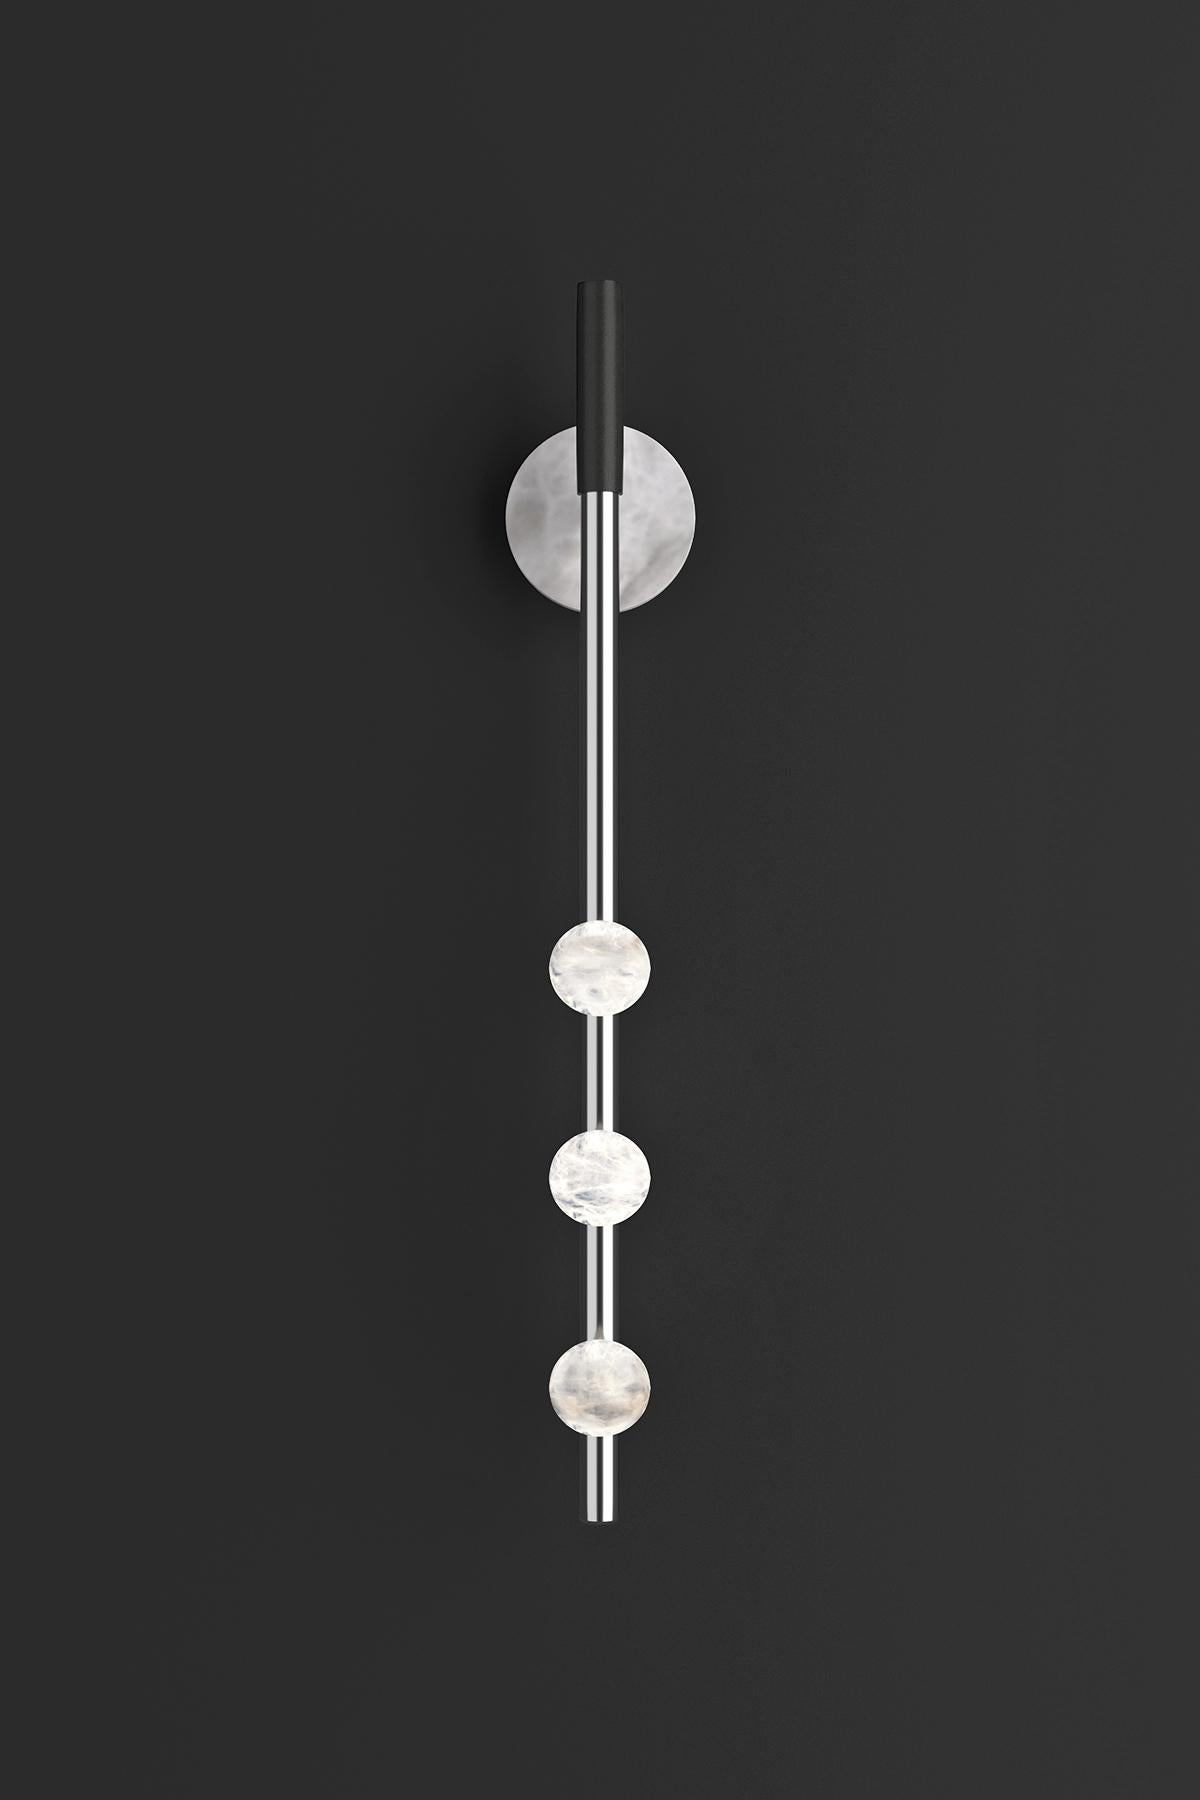 Demetra Shiny Silver Metal Wall Lamp by Alabastro Italiano
Dimensions: D 9 x W 10 x H 60 cm.
Materials: White alabaster, metal and leather.

Available in different finishes: Shiny Silver, Bronze, Brushed Brass, Ruggine of Florence, Brushed